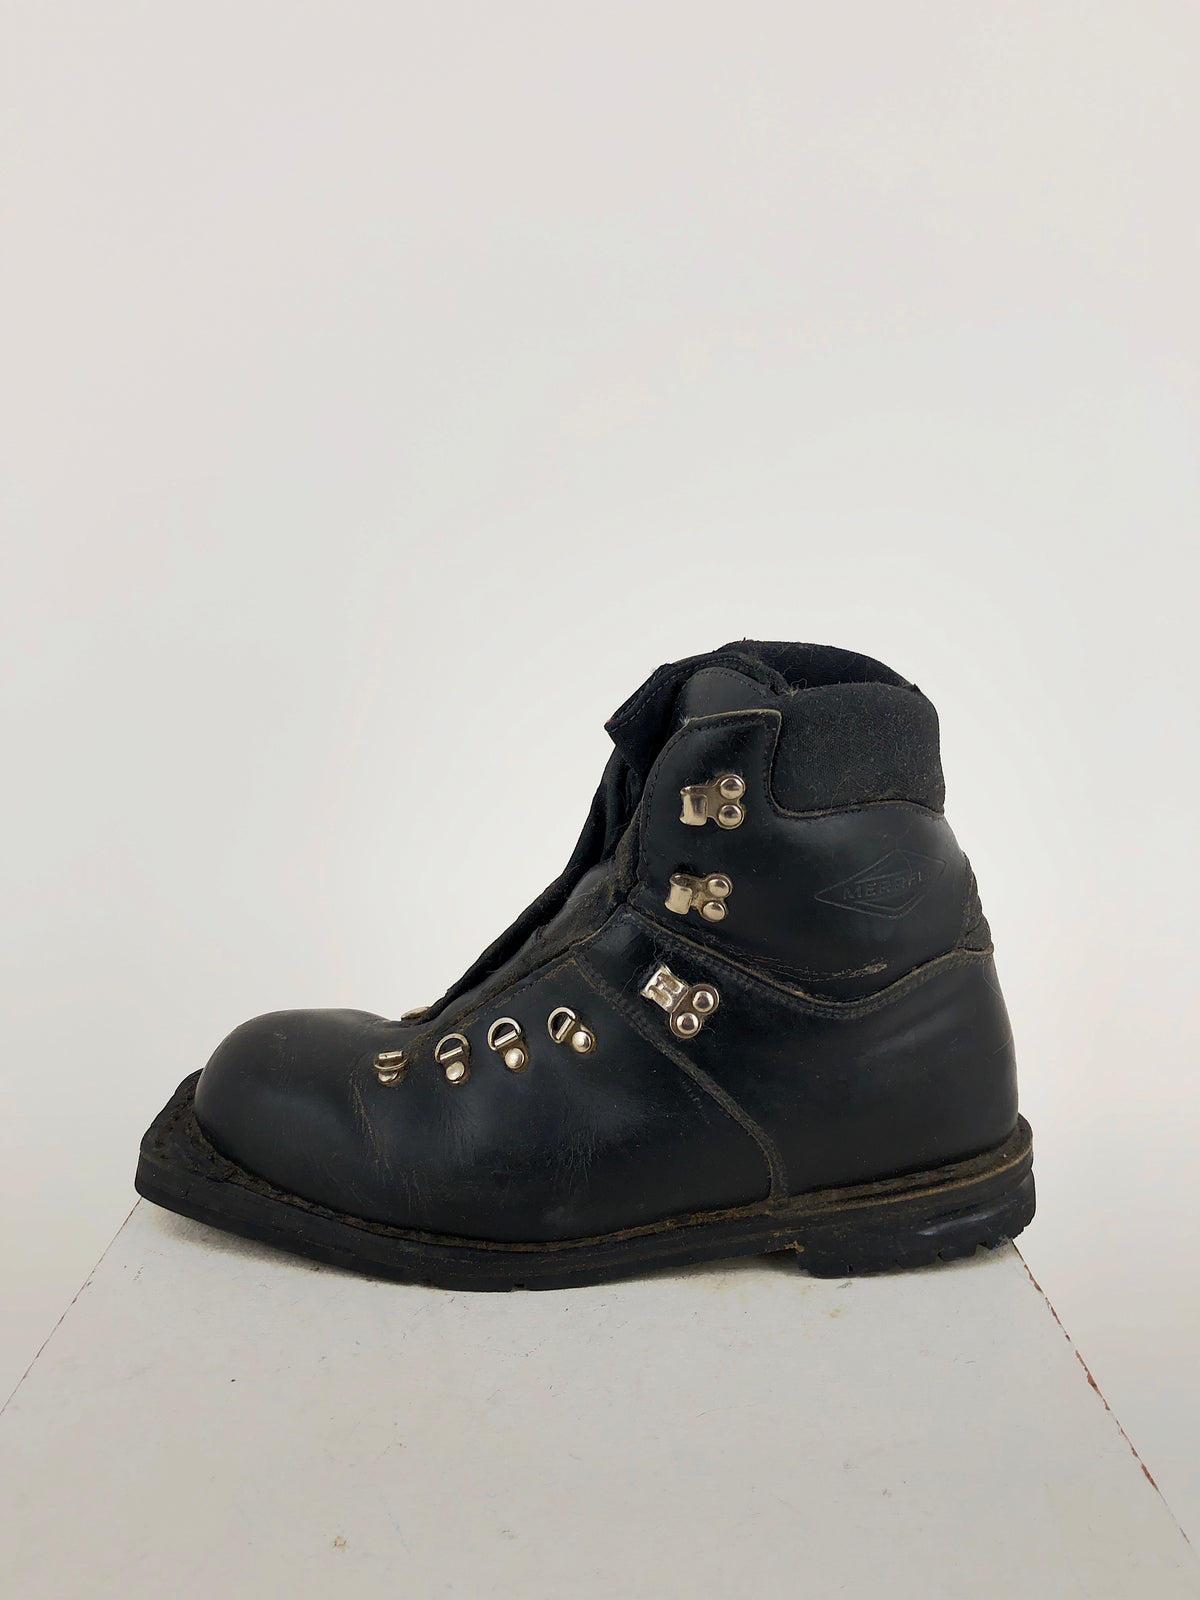 10.5 Merrell Leather Boots (Used)